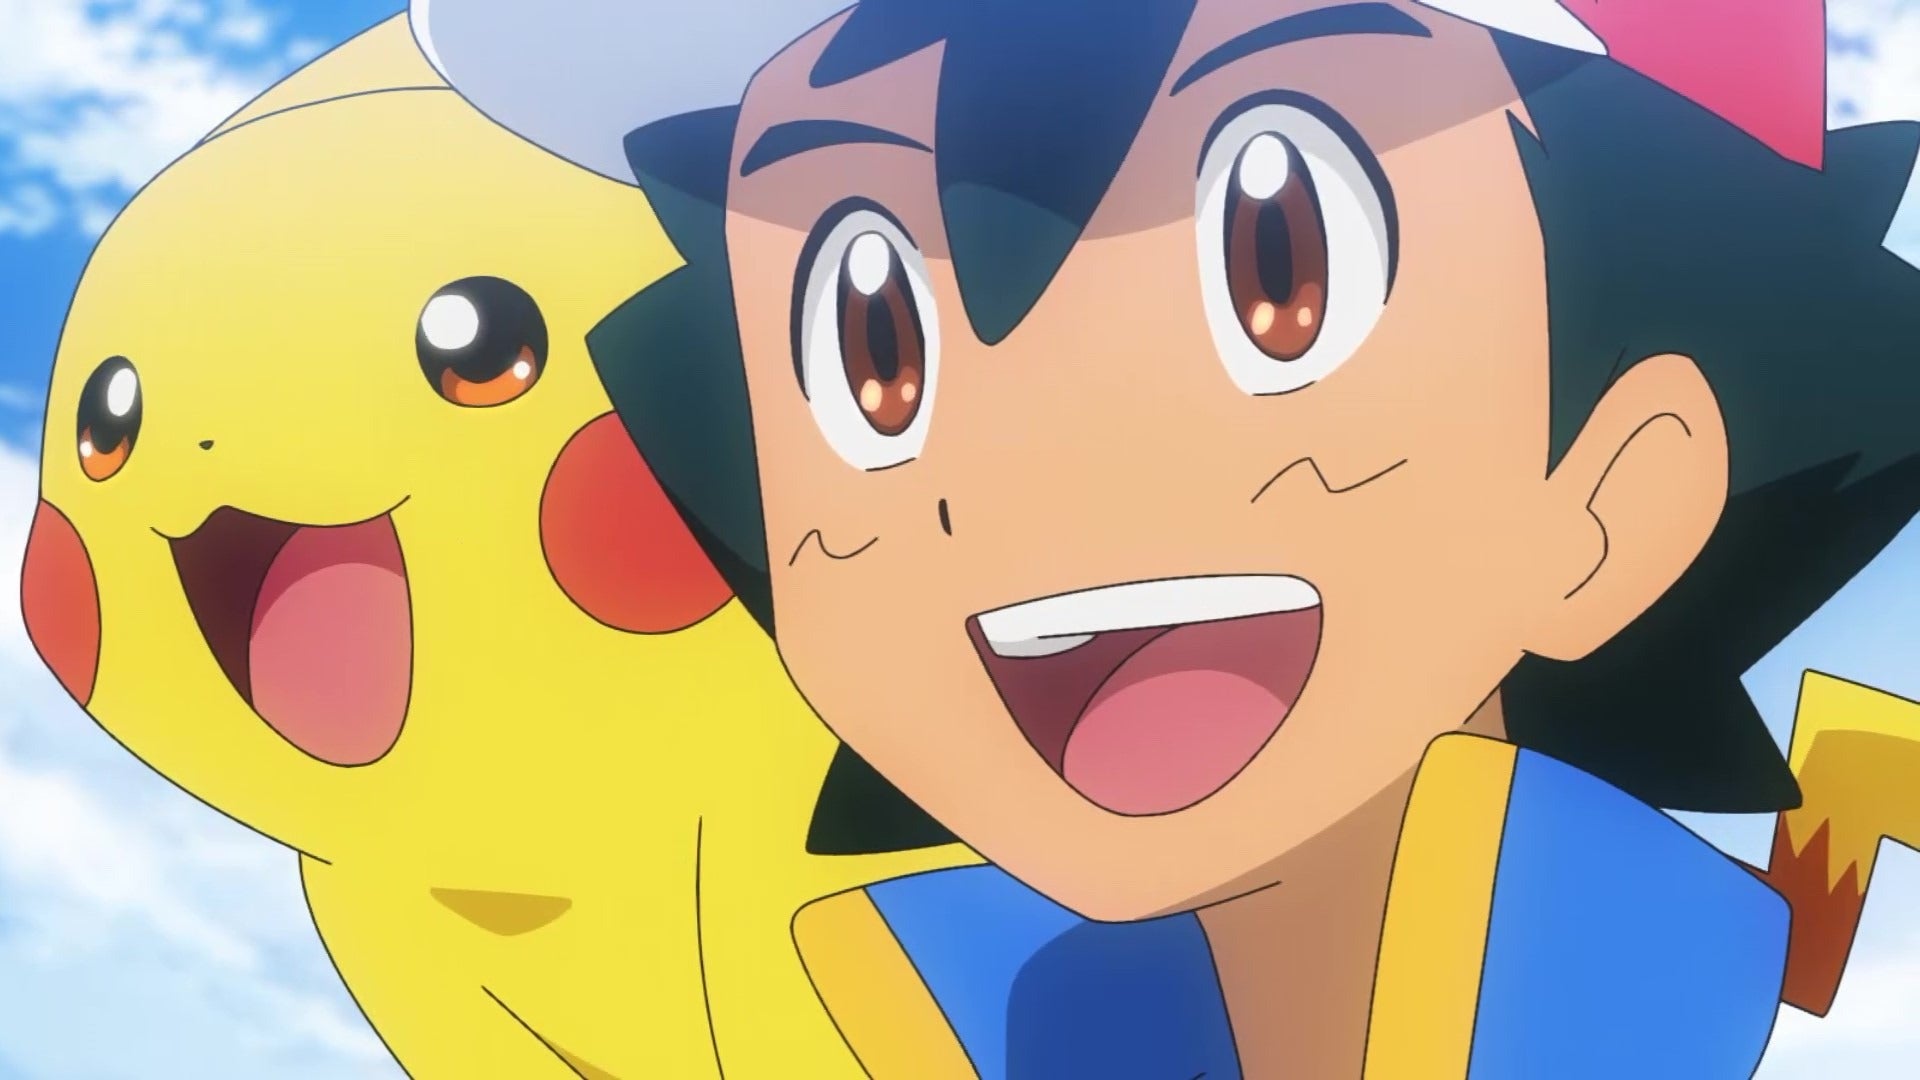 Stream Pokemon XYZ Theme Song Japanese cover full version by Tails